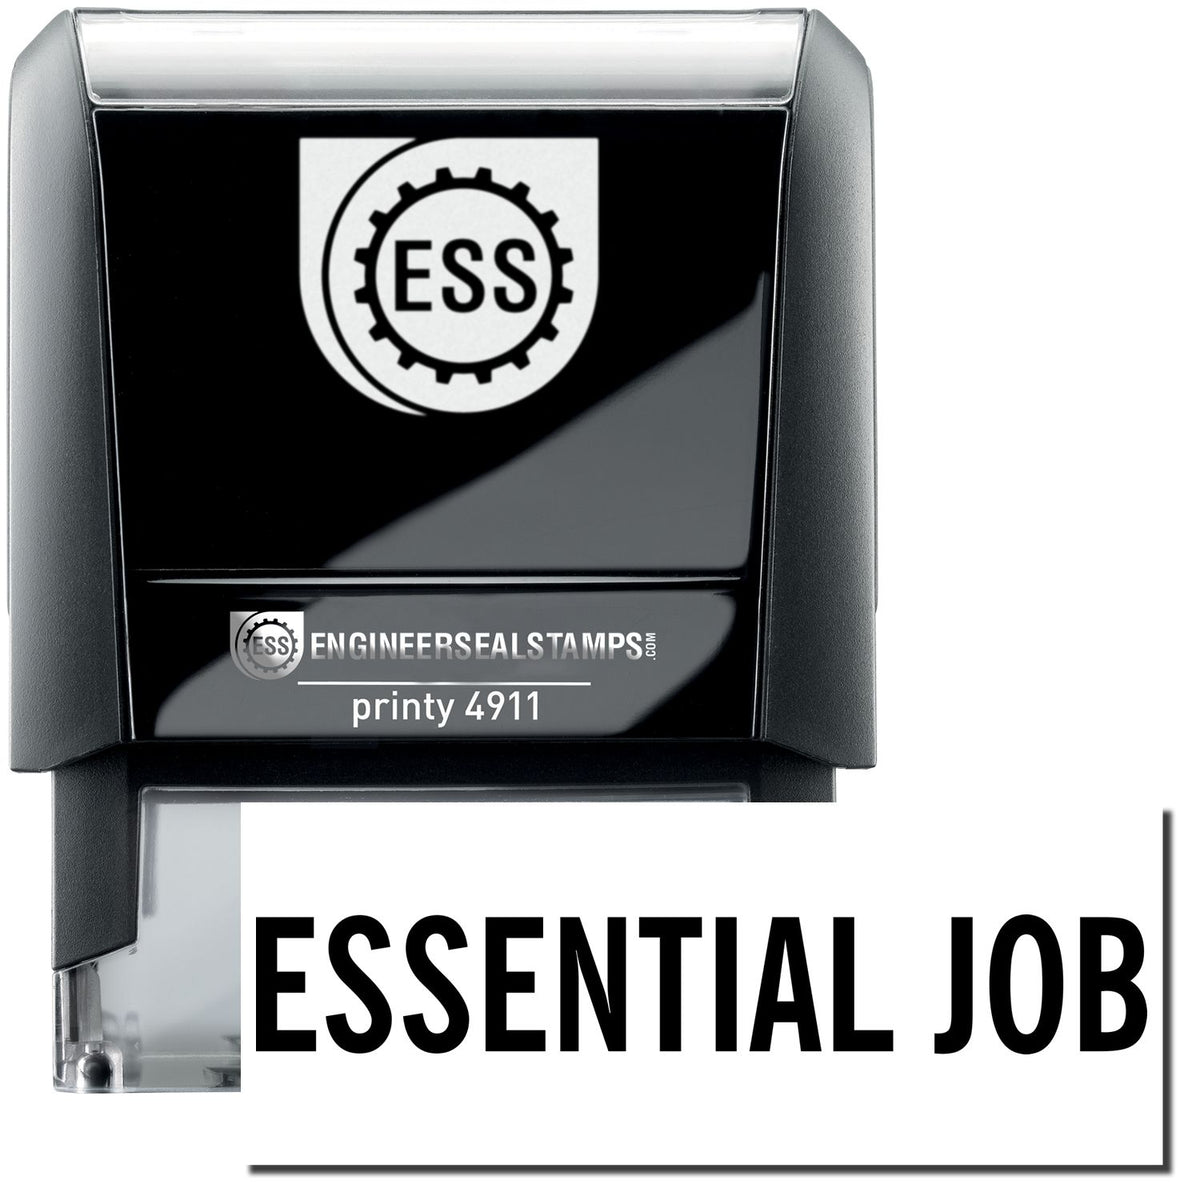 A self-inking stamp with a stamped image showing how the text &quot;ESSENTIAL JOB&quot; is displayed after stamping.